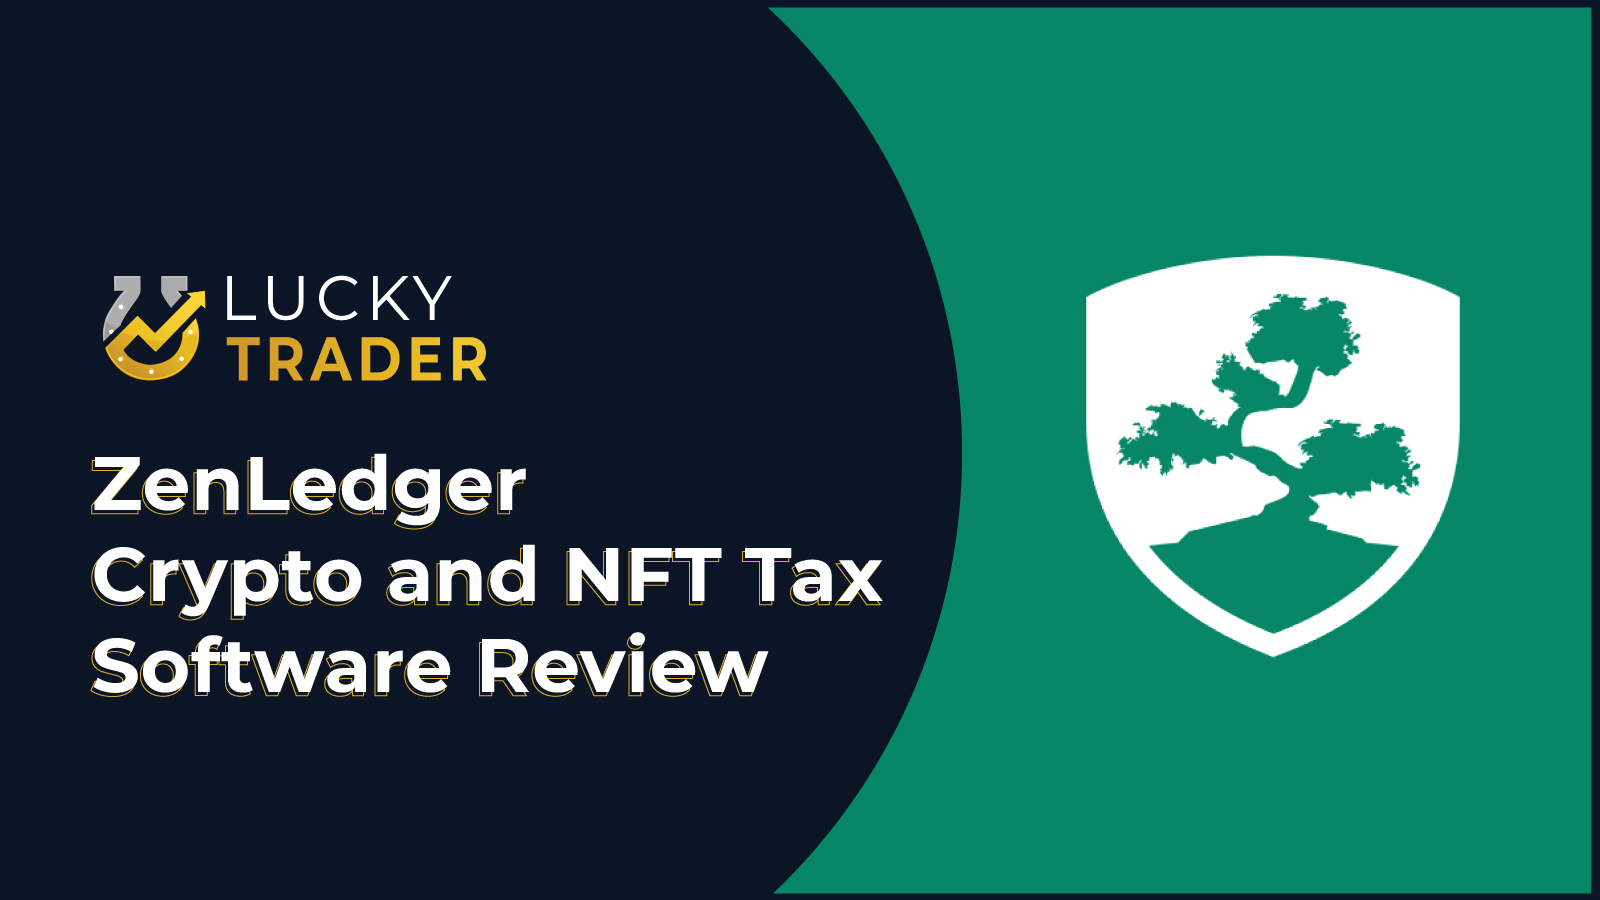 ZenLedger Cryptocurrency and NFT Tax Software Review